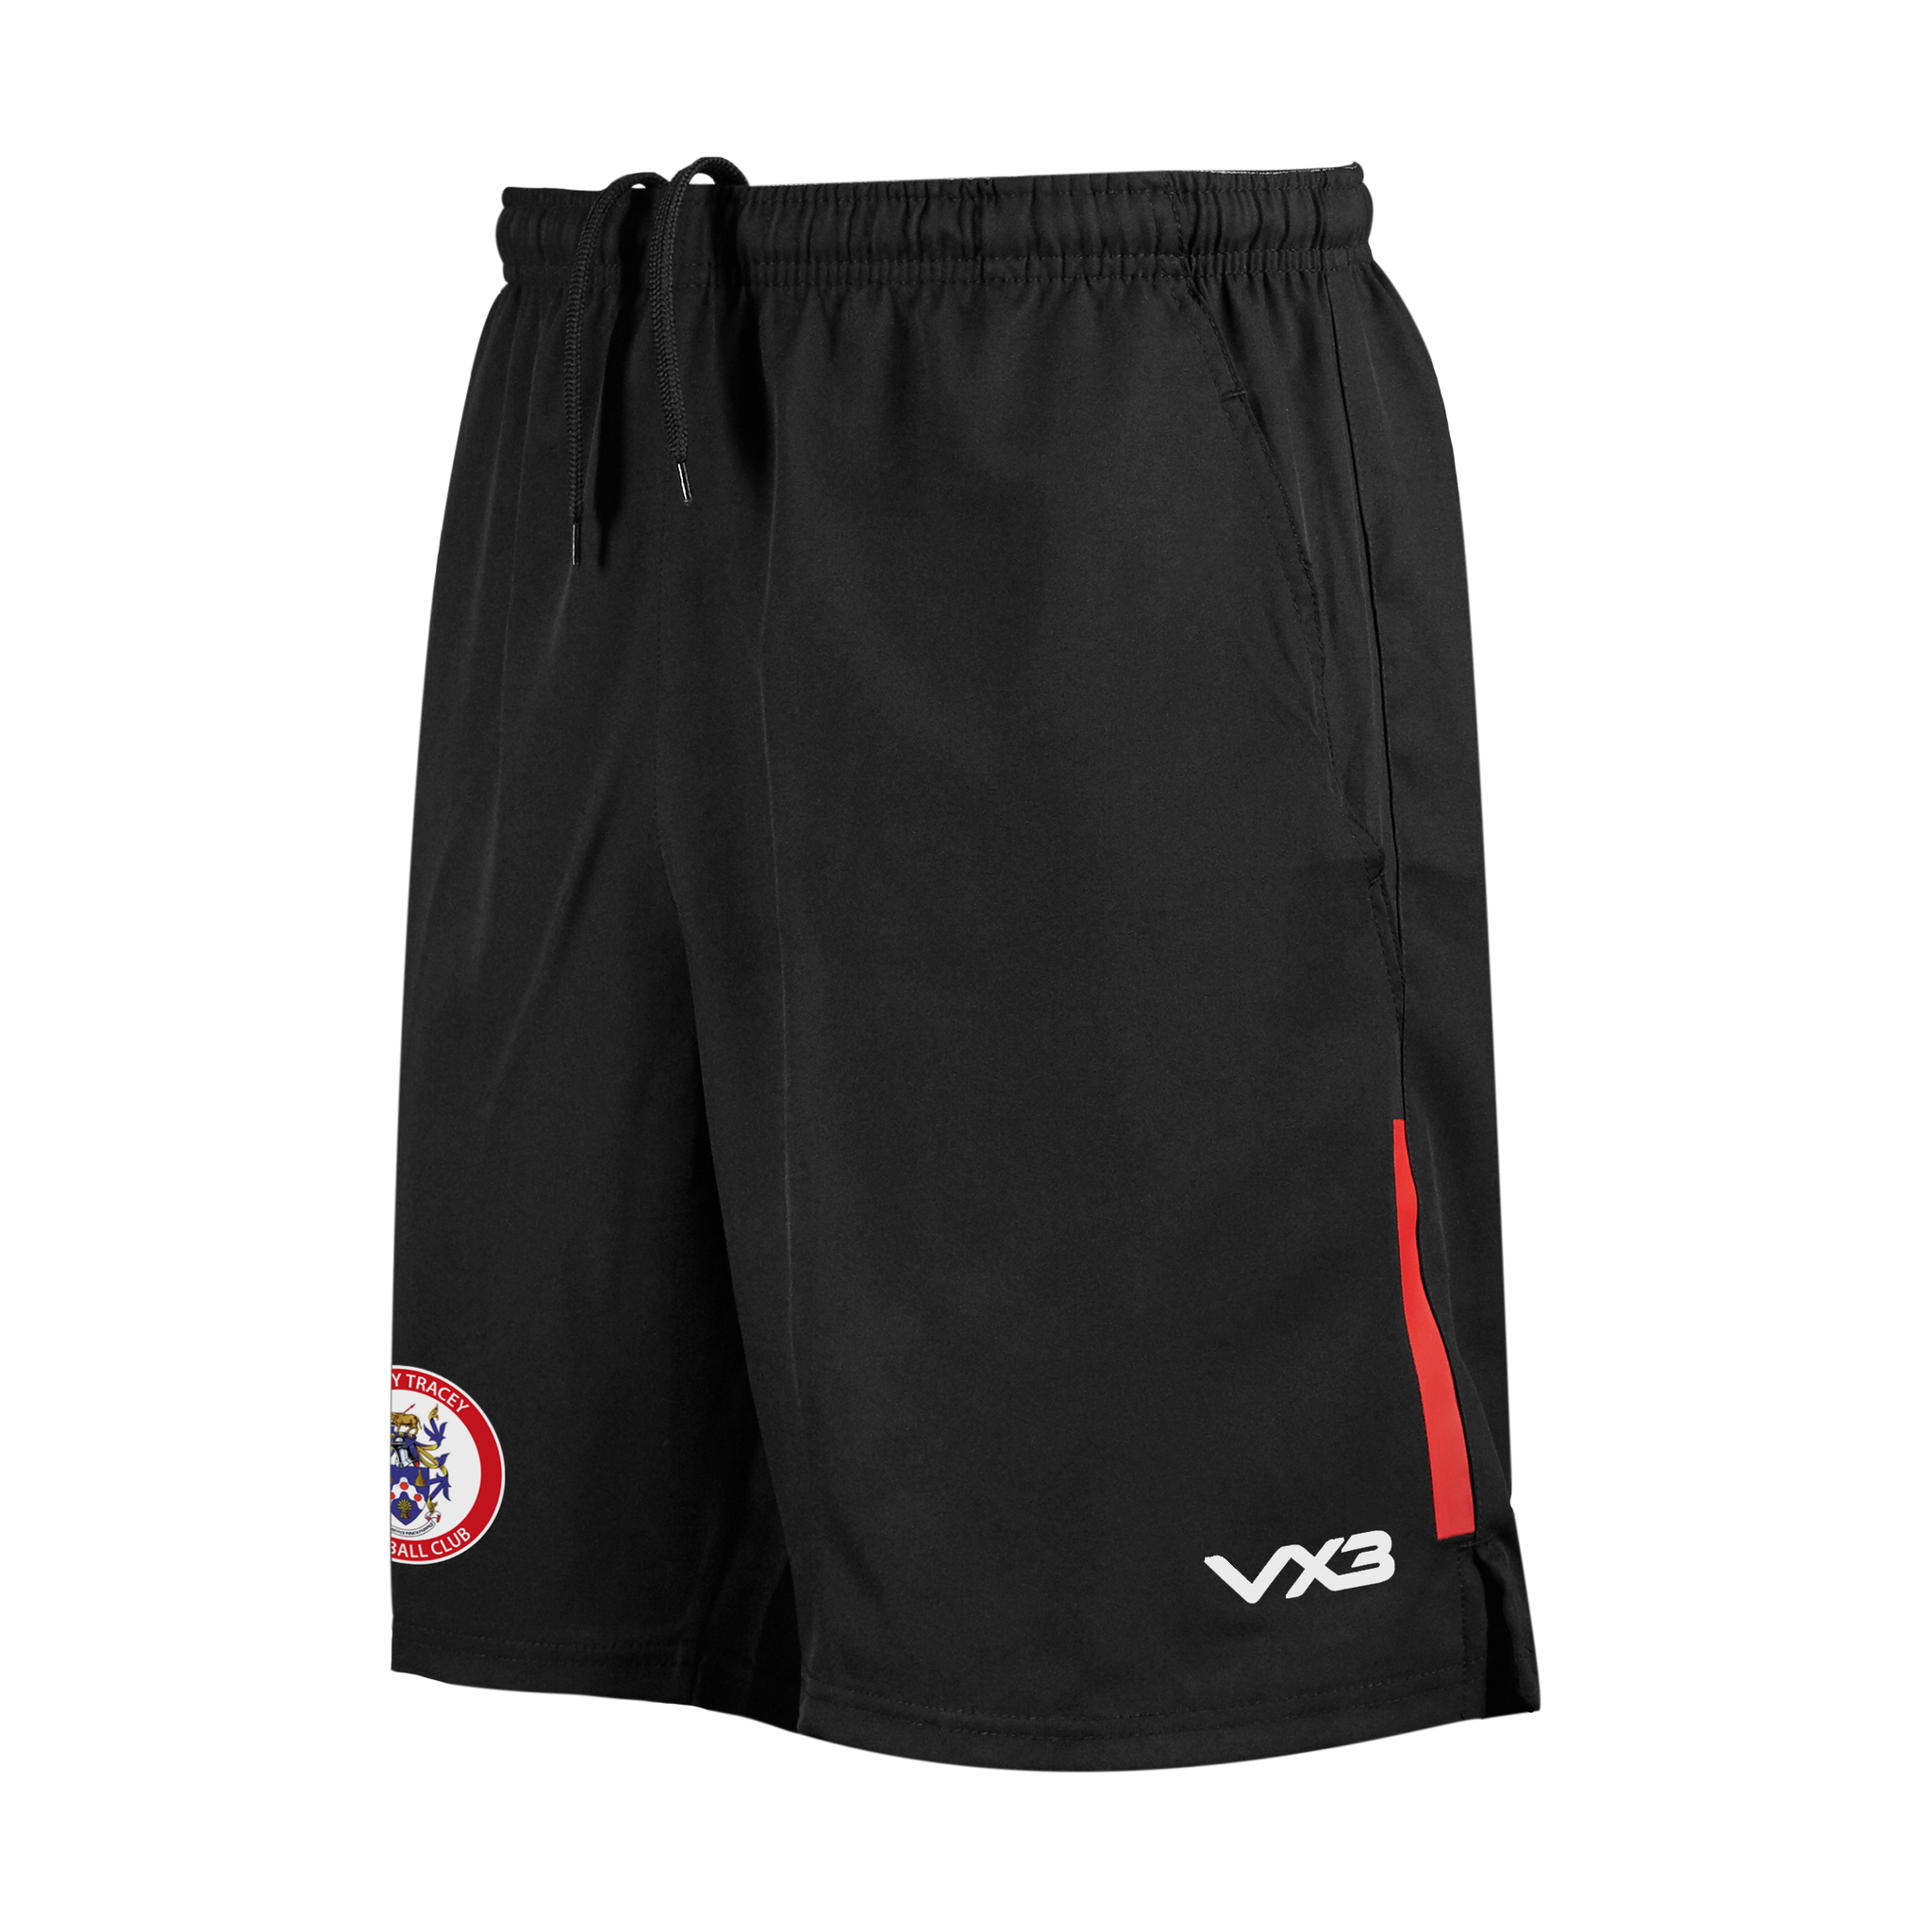 Bovey Tracey AFC Fortis Youth Travel Shorts